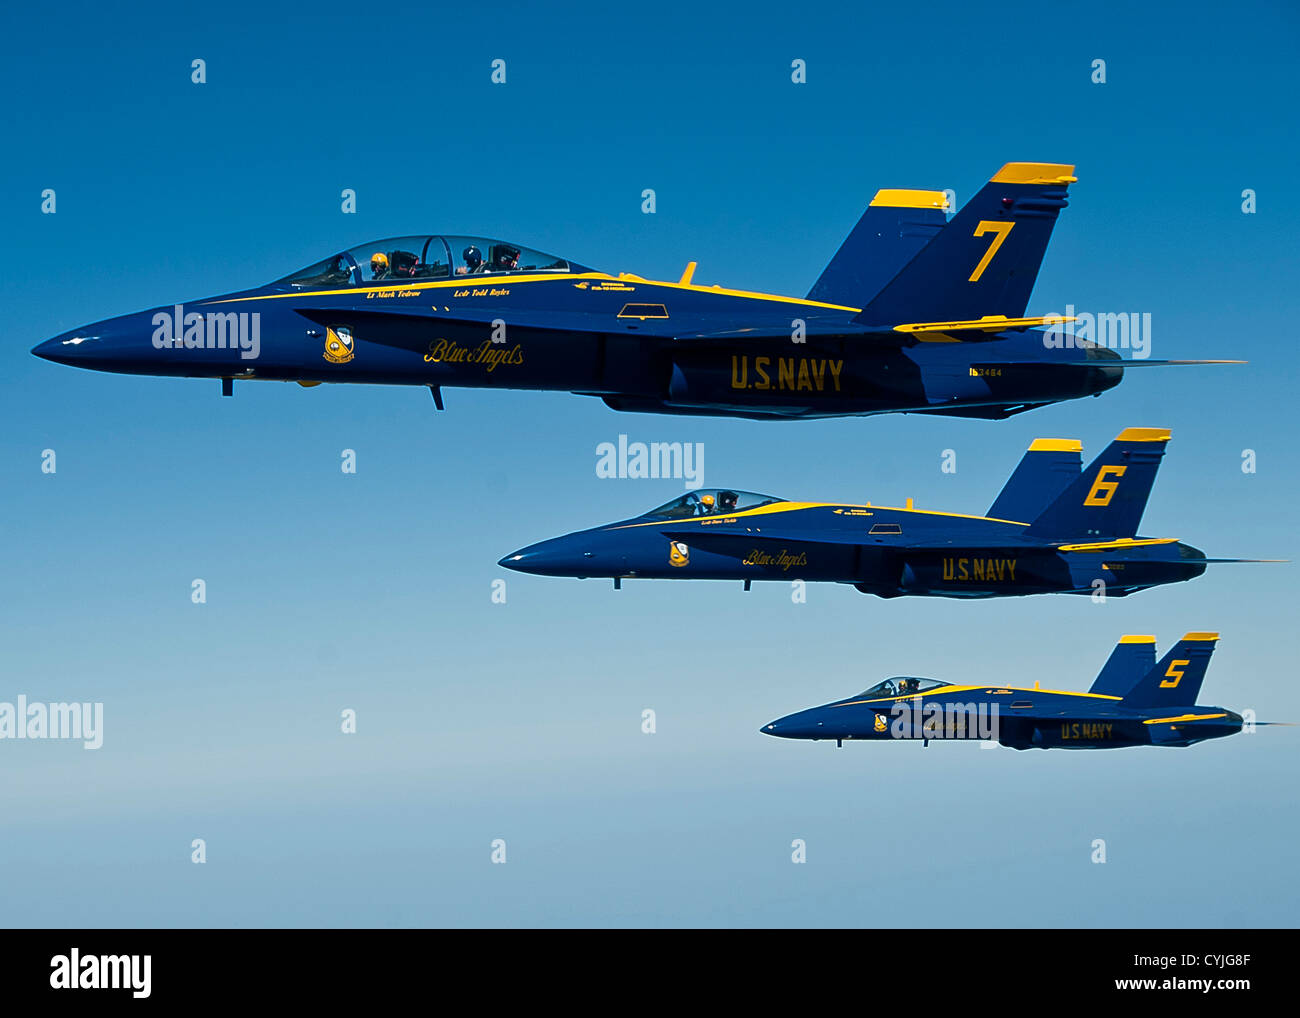 A formation of US Navy Blue Angel FA-18 Hornets fly together September 20, 2012 over Altus Air Force Base, Oklahoma. Stock Photo